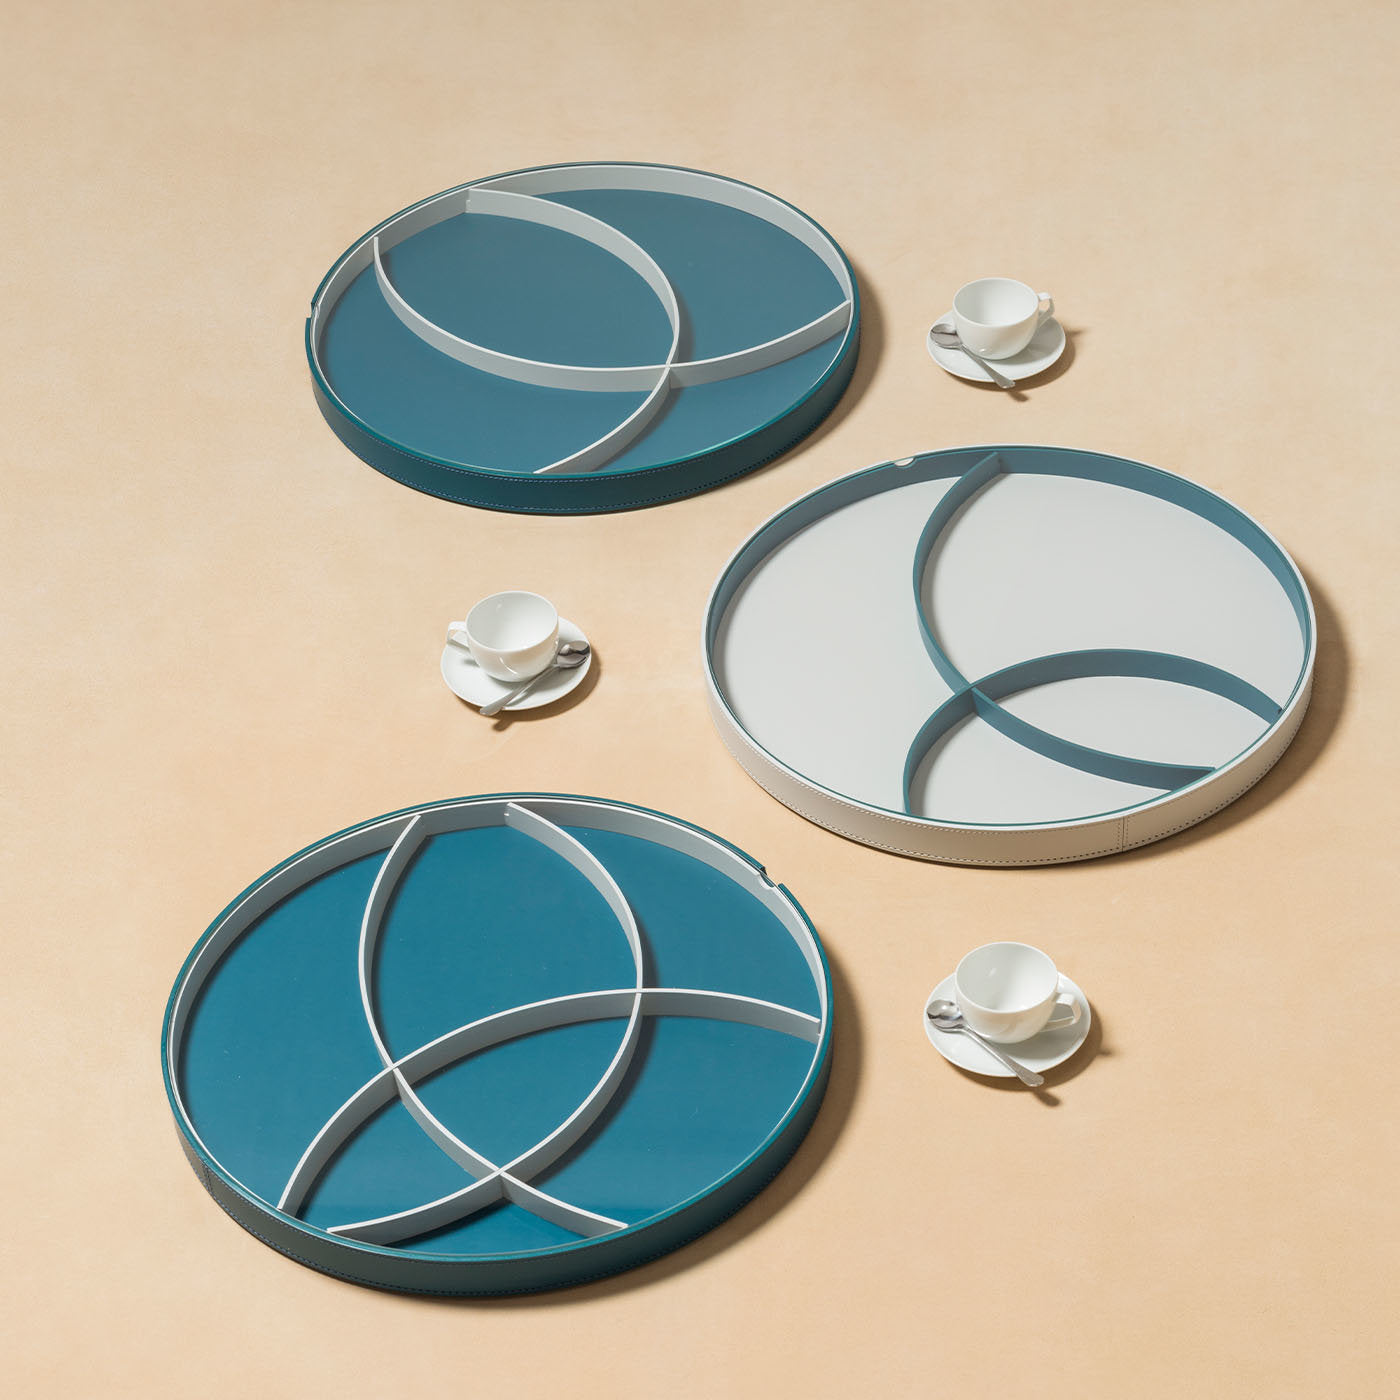 Orbit White Round Tray N. 1 with Dividers - Alternative view 1